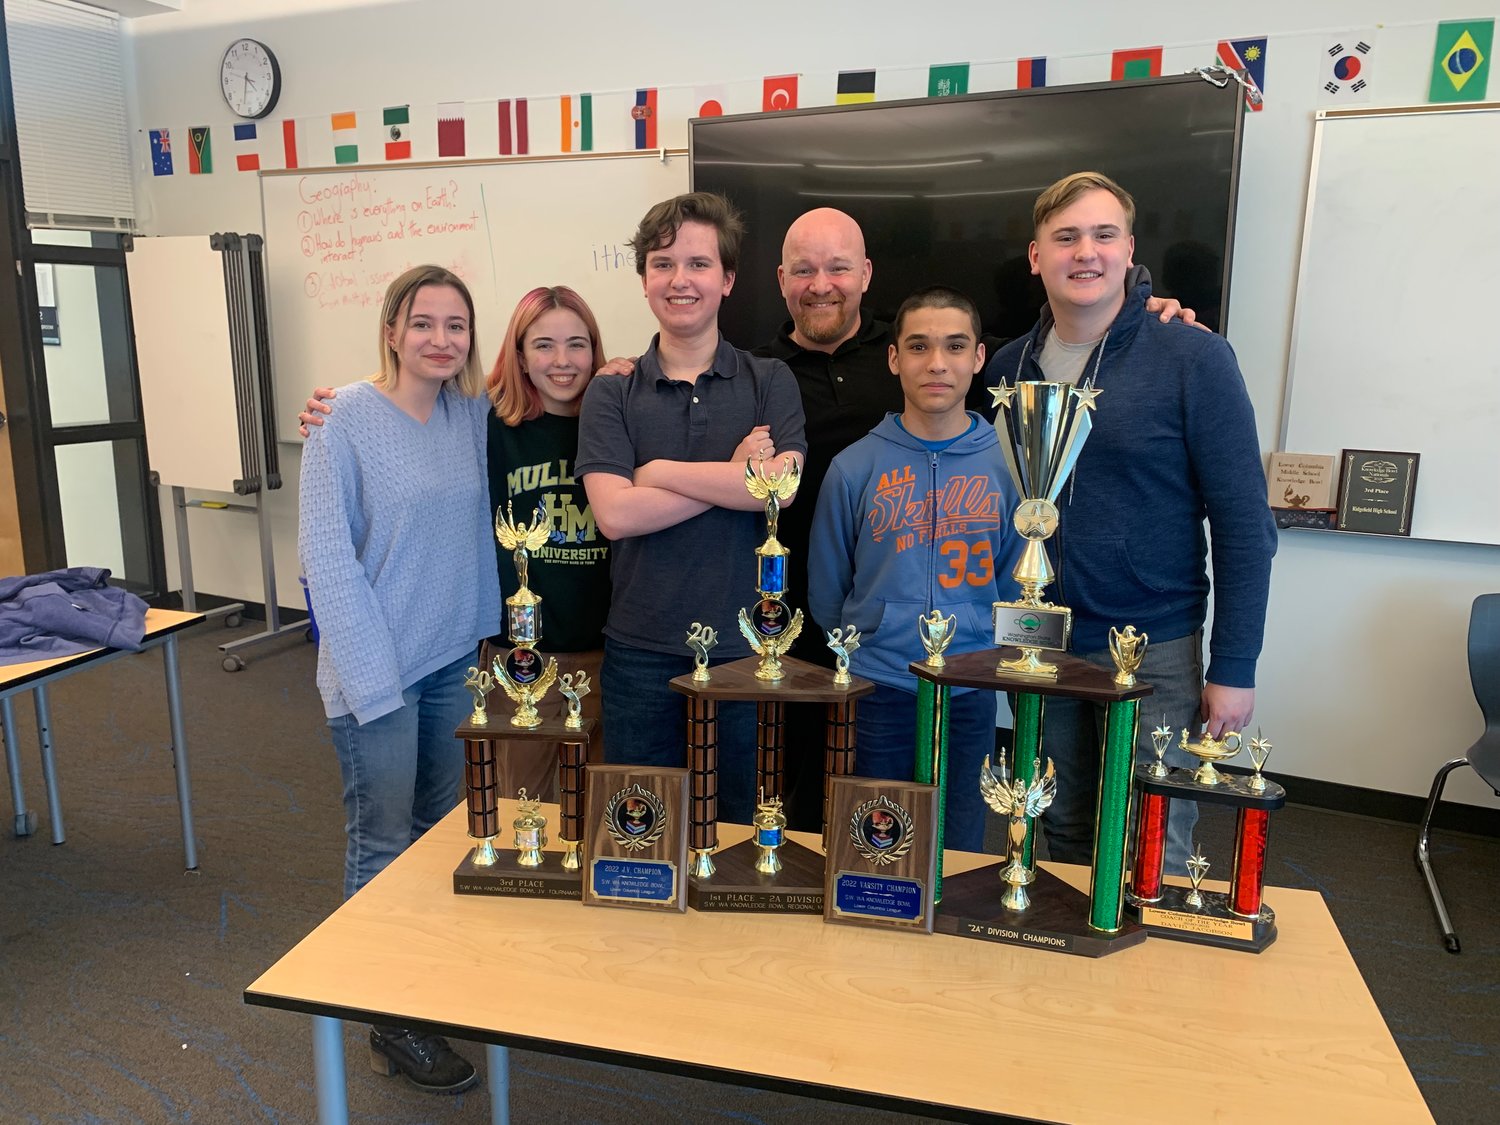 From left to right, Ridgefield High School National Knowledge Bowl champions Emiliana Newell, Olivia DesRochers, Adam Ford, coach David Jacobson, James Haddix, and captain Micah Ross.